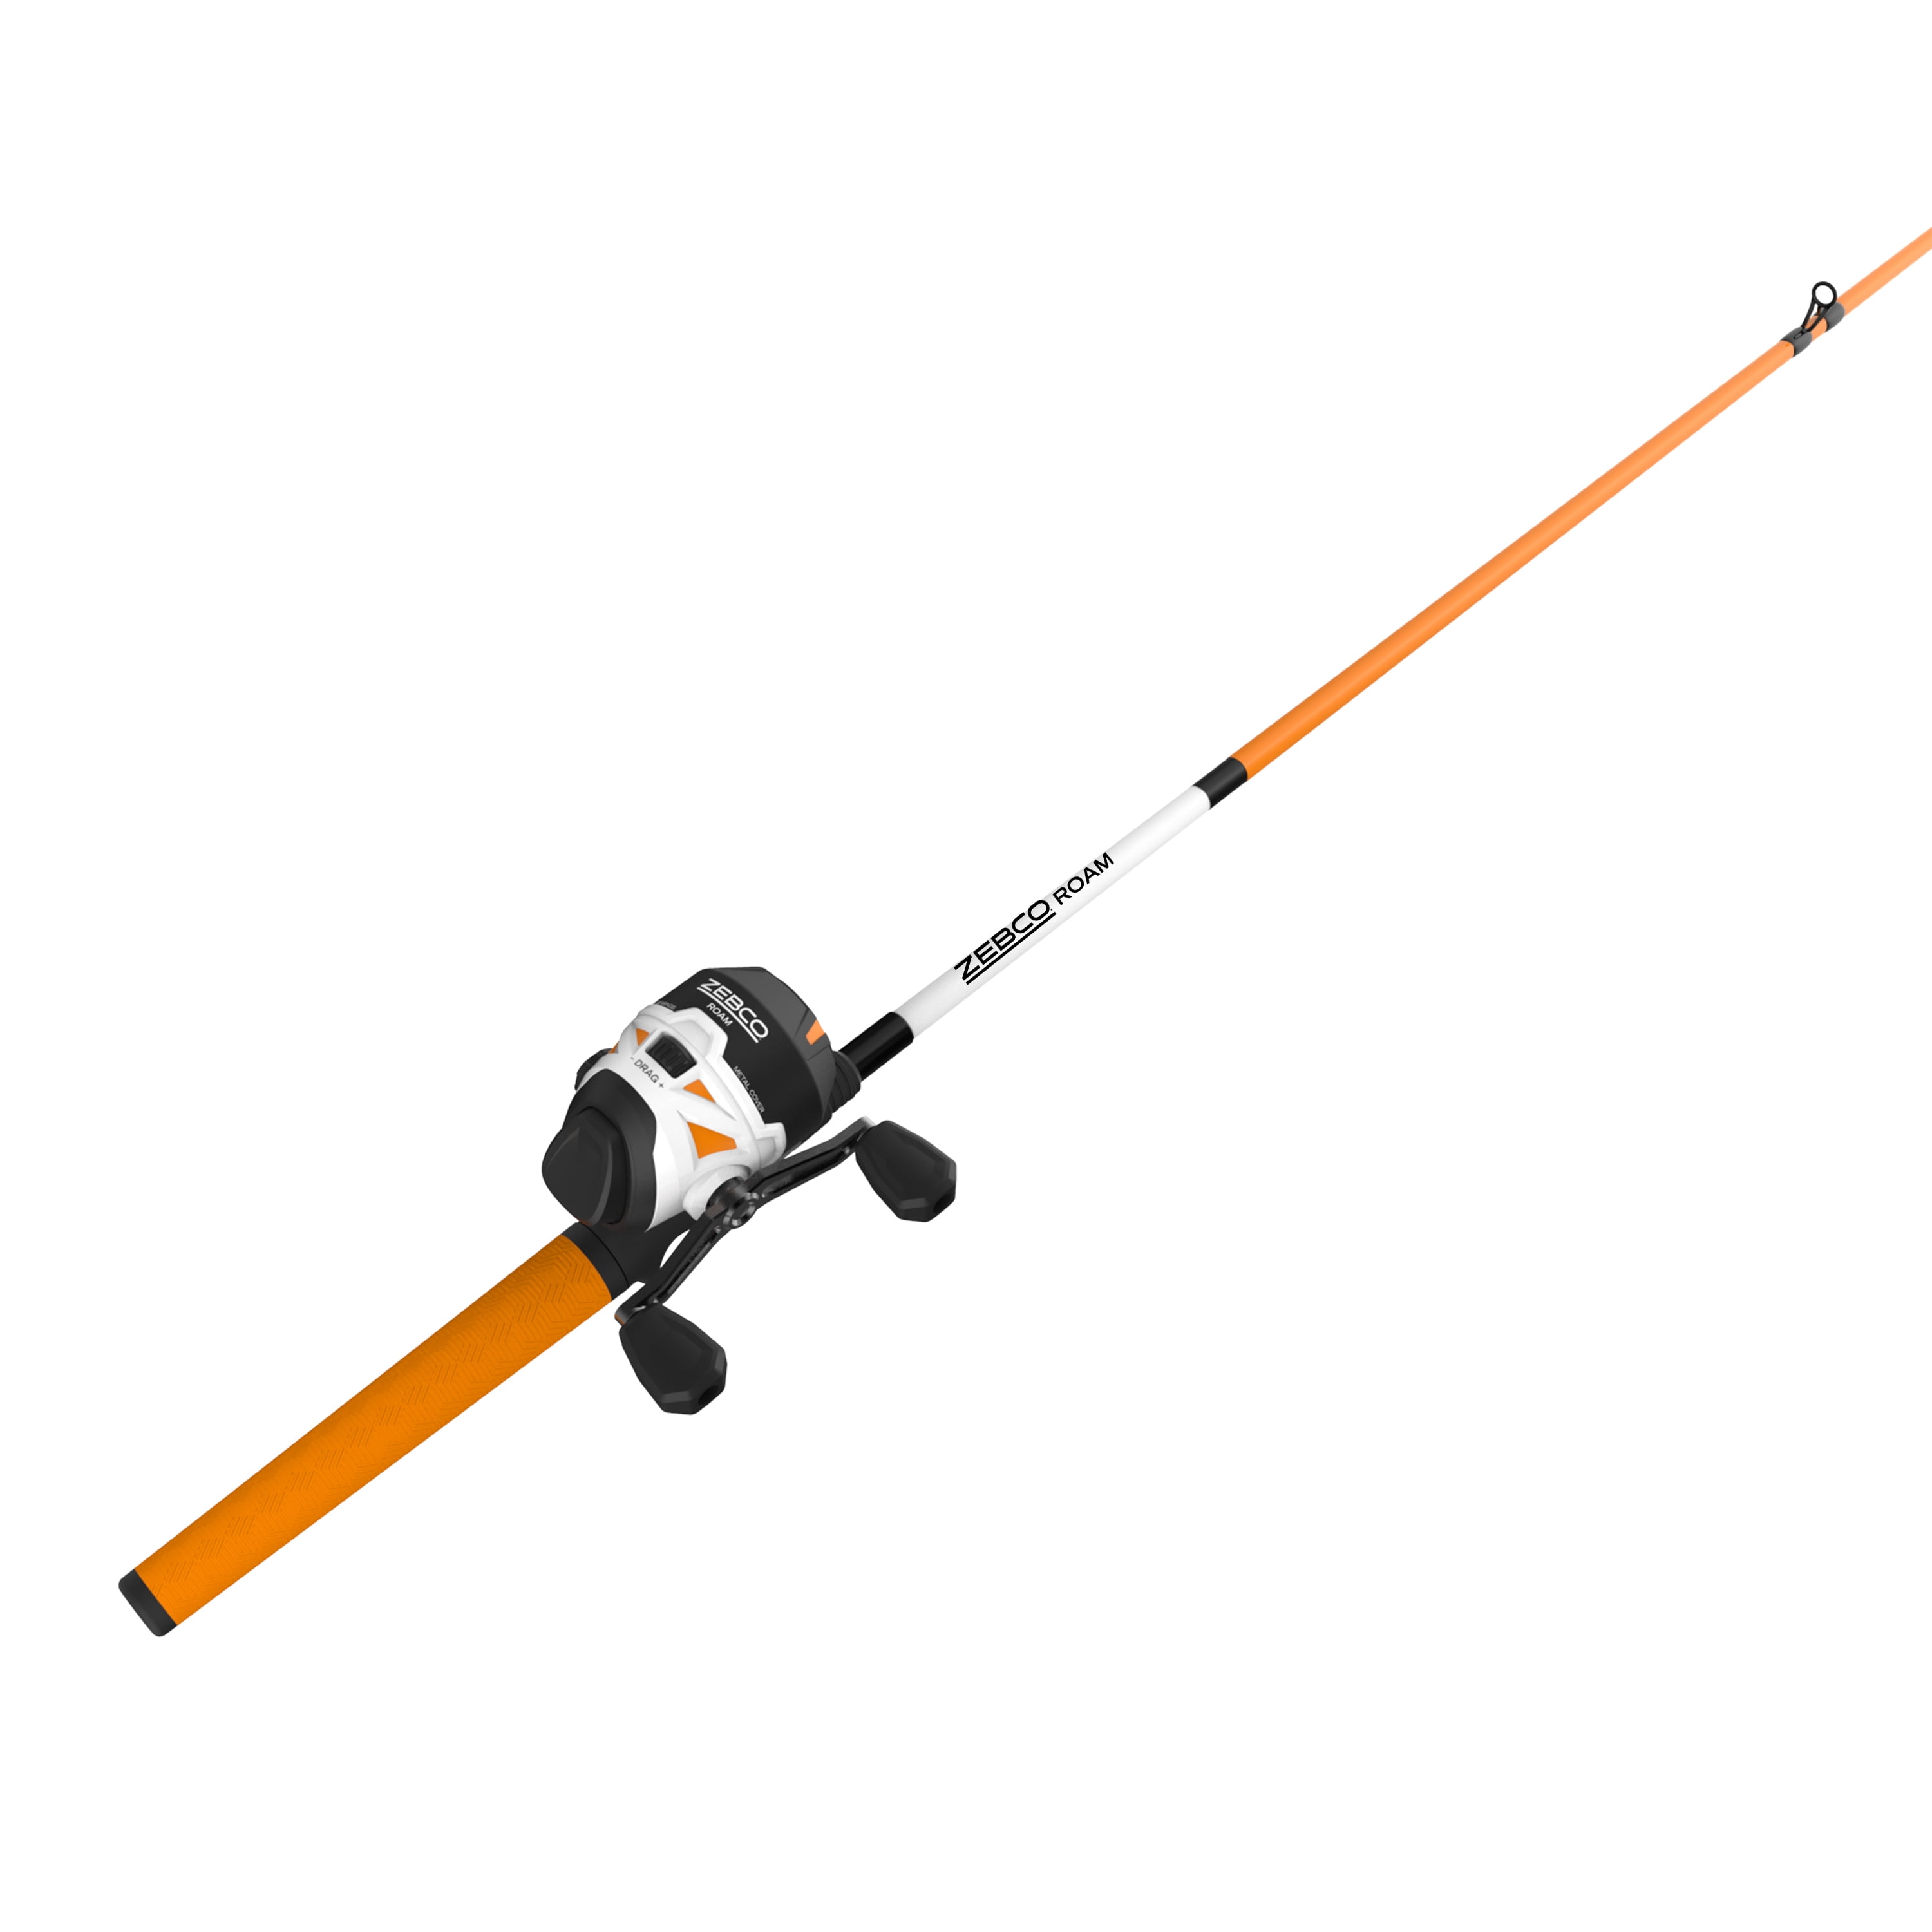 Durable Fiberglass Rod with ComfortGrip Handle All-Metal Gears Zebco Roam Spinning Reel and 2-Piece Fishing Rod Combo Instant Anti-Reverse Fishing Reel